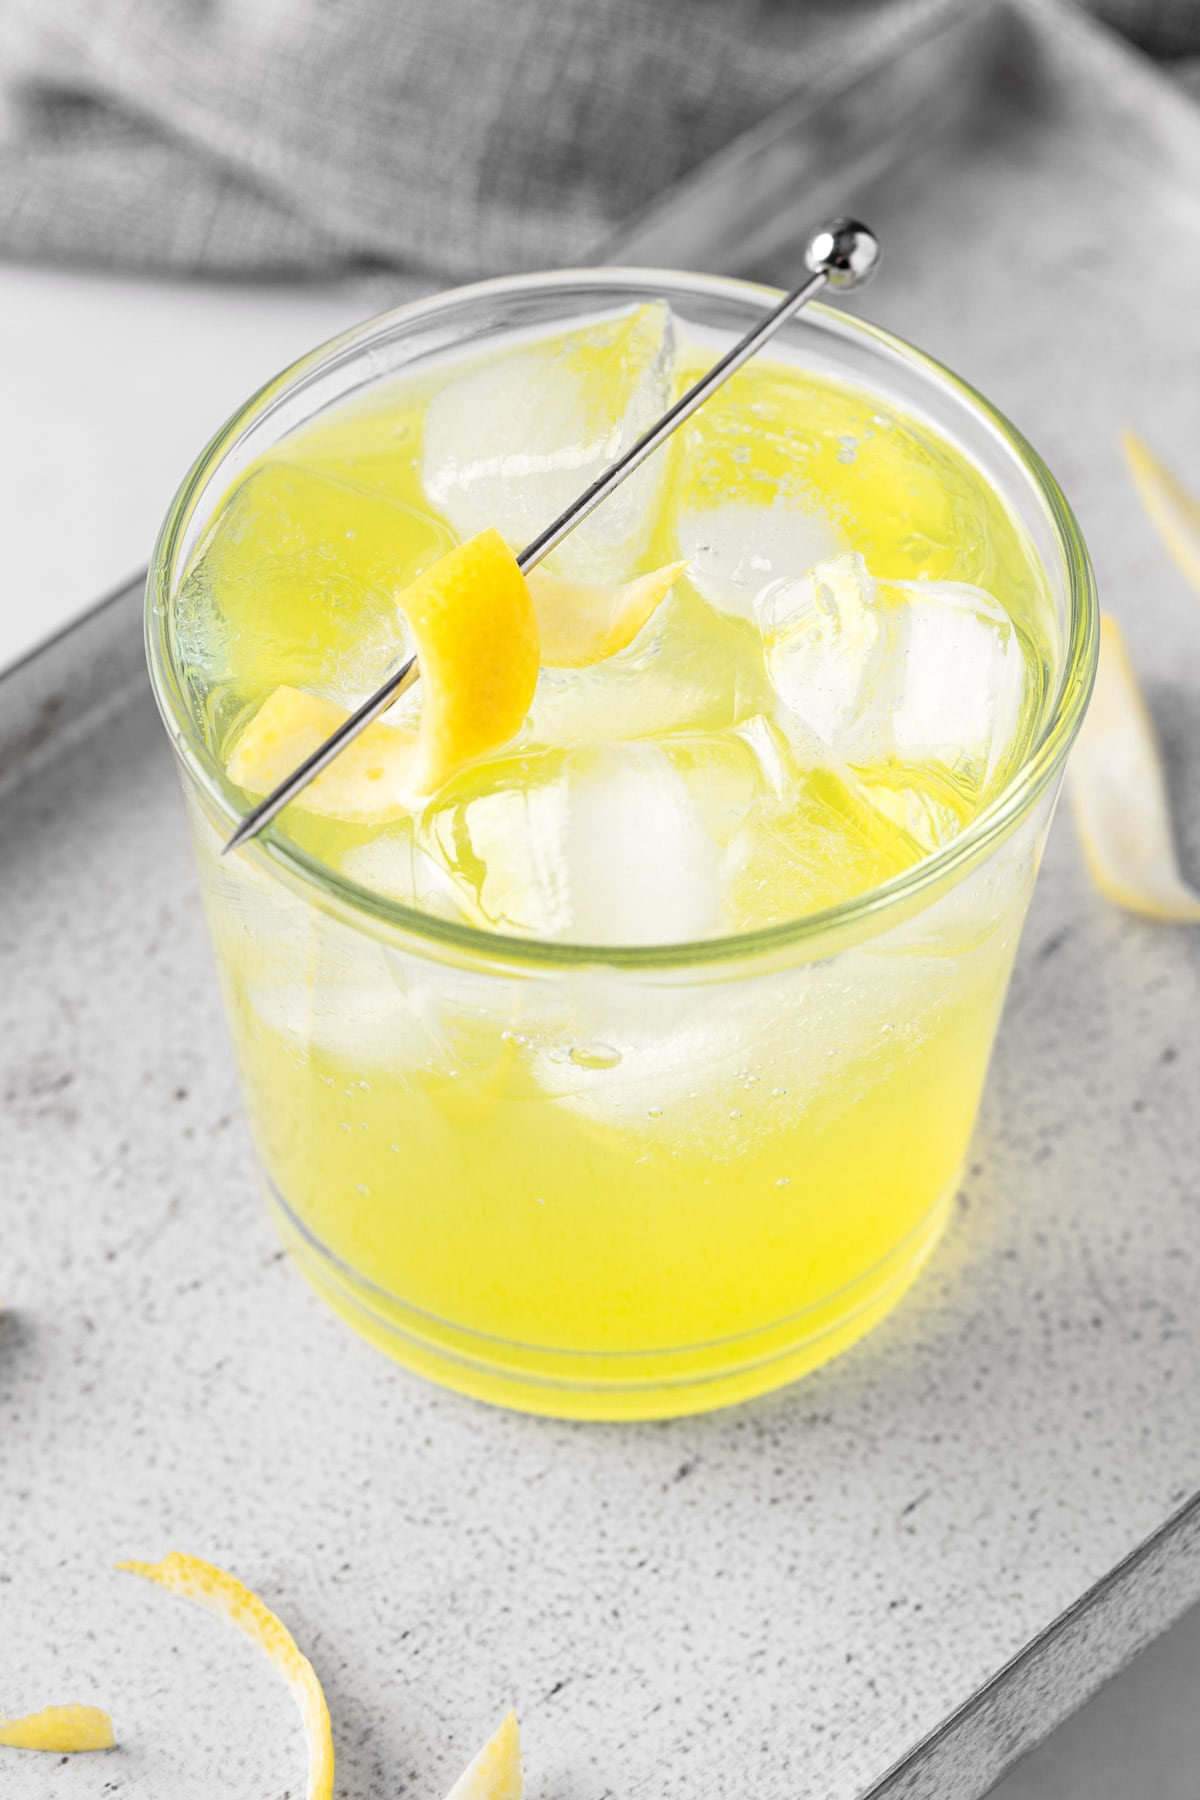 Overhead view of a limoncello tonic garnished with a lemon peel twist.